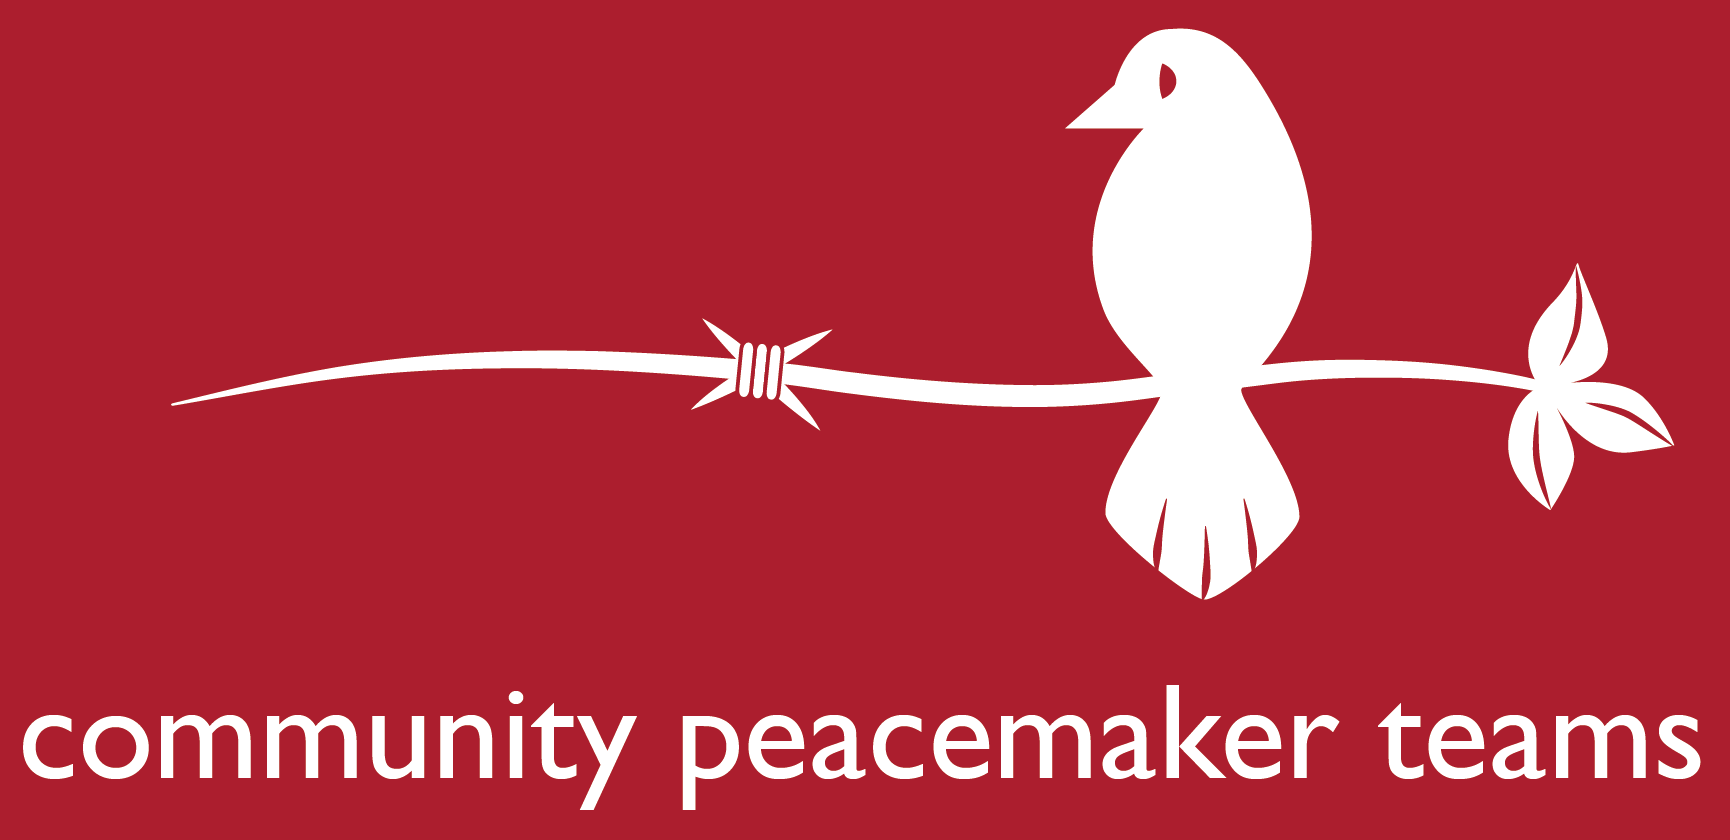 A white dove sitting on a barbed-wire fence with Community Peacemaker Teams written below